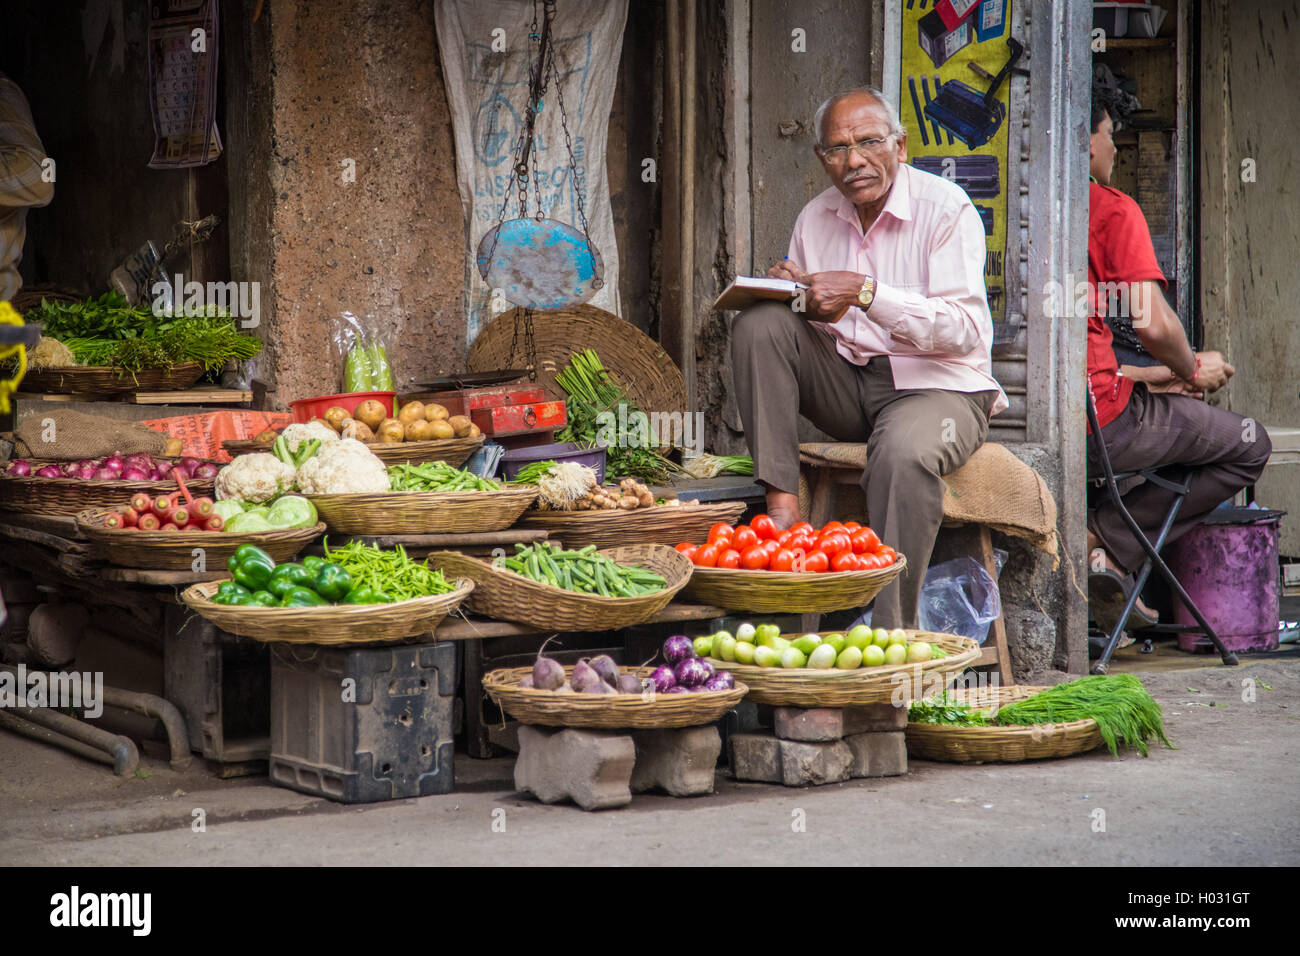 MUMBAI, INDIA - 17 JANUARY 2015: Elderly Indian businessman waits for customers in front of grocery store in market street. Stock Photo